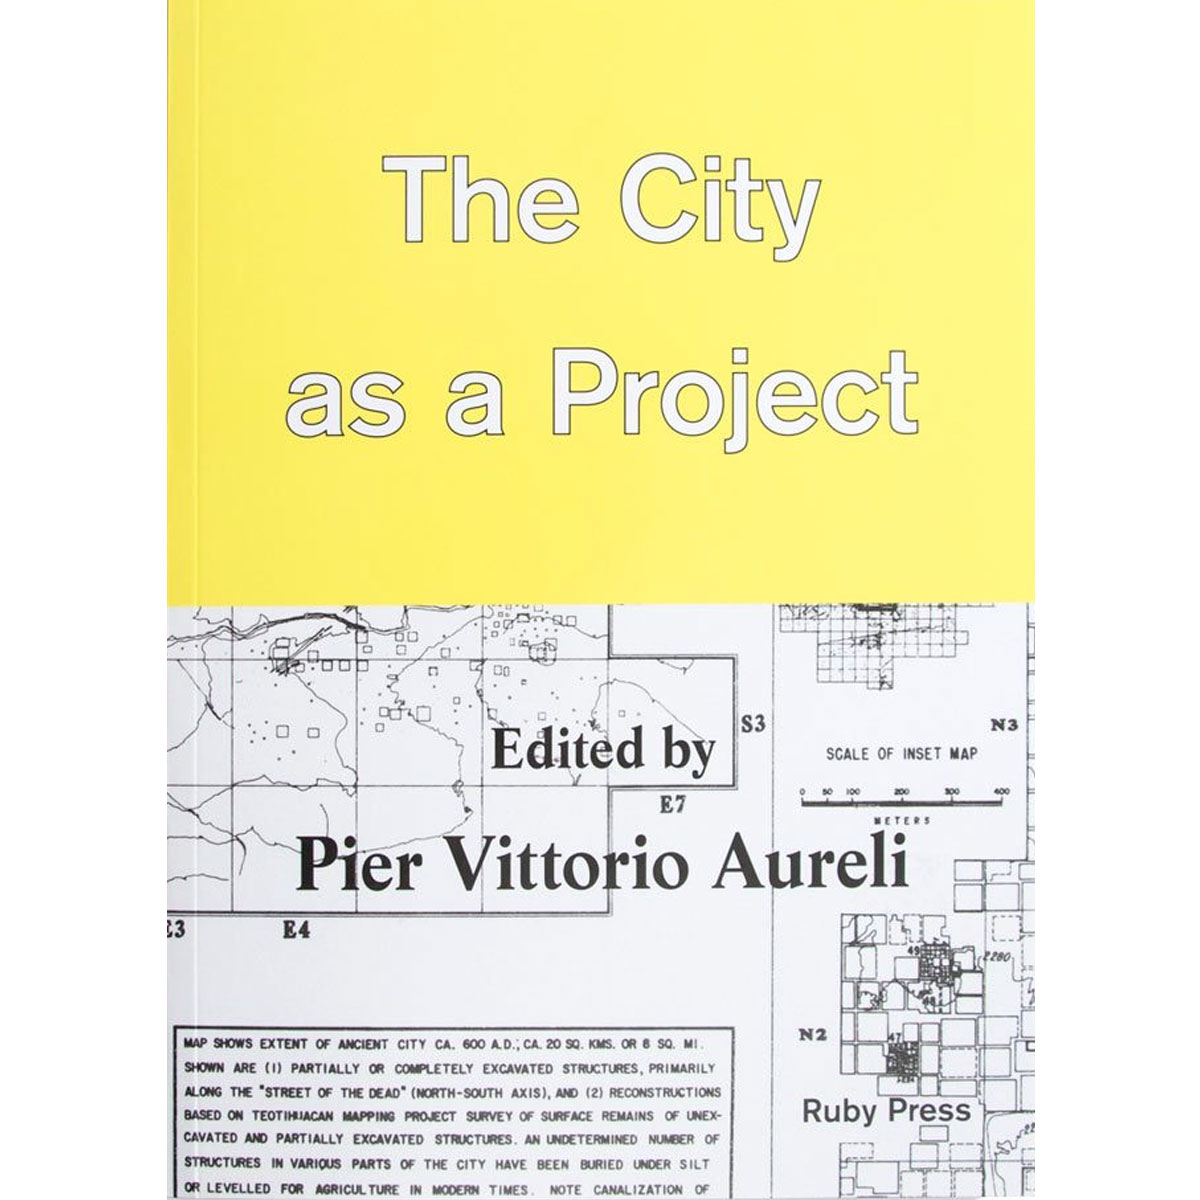 The City as a Project Edited by Pier Vittorio Aureli